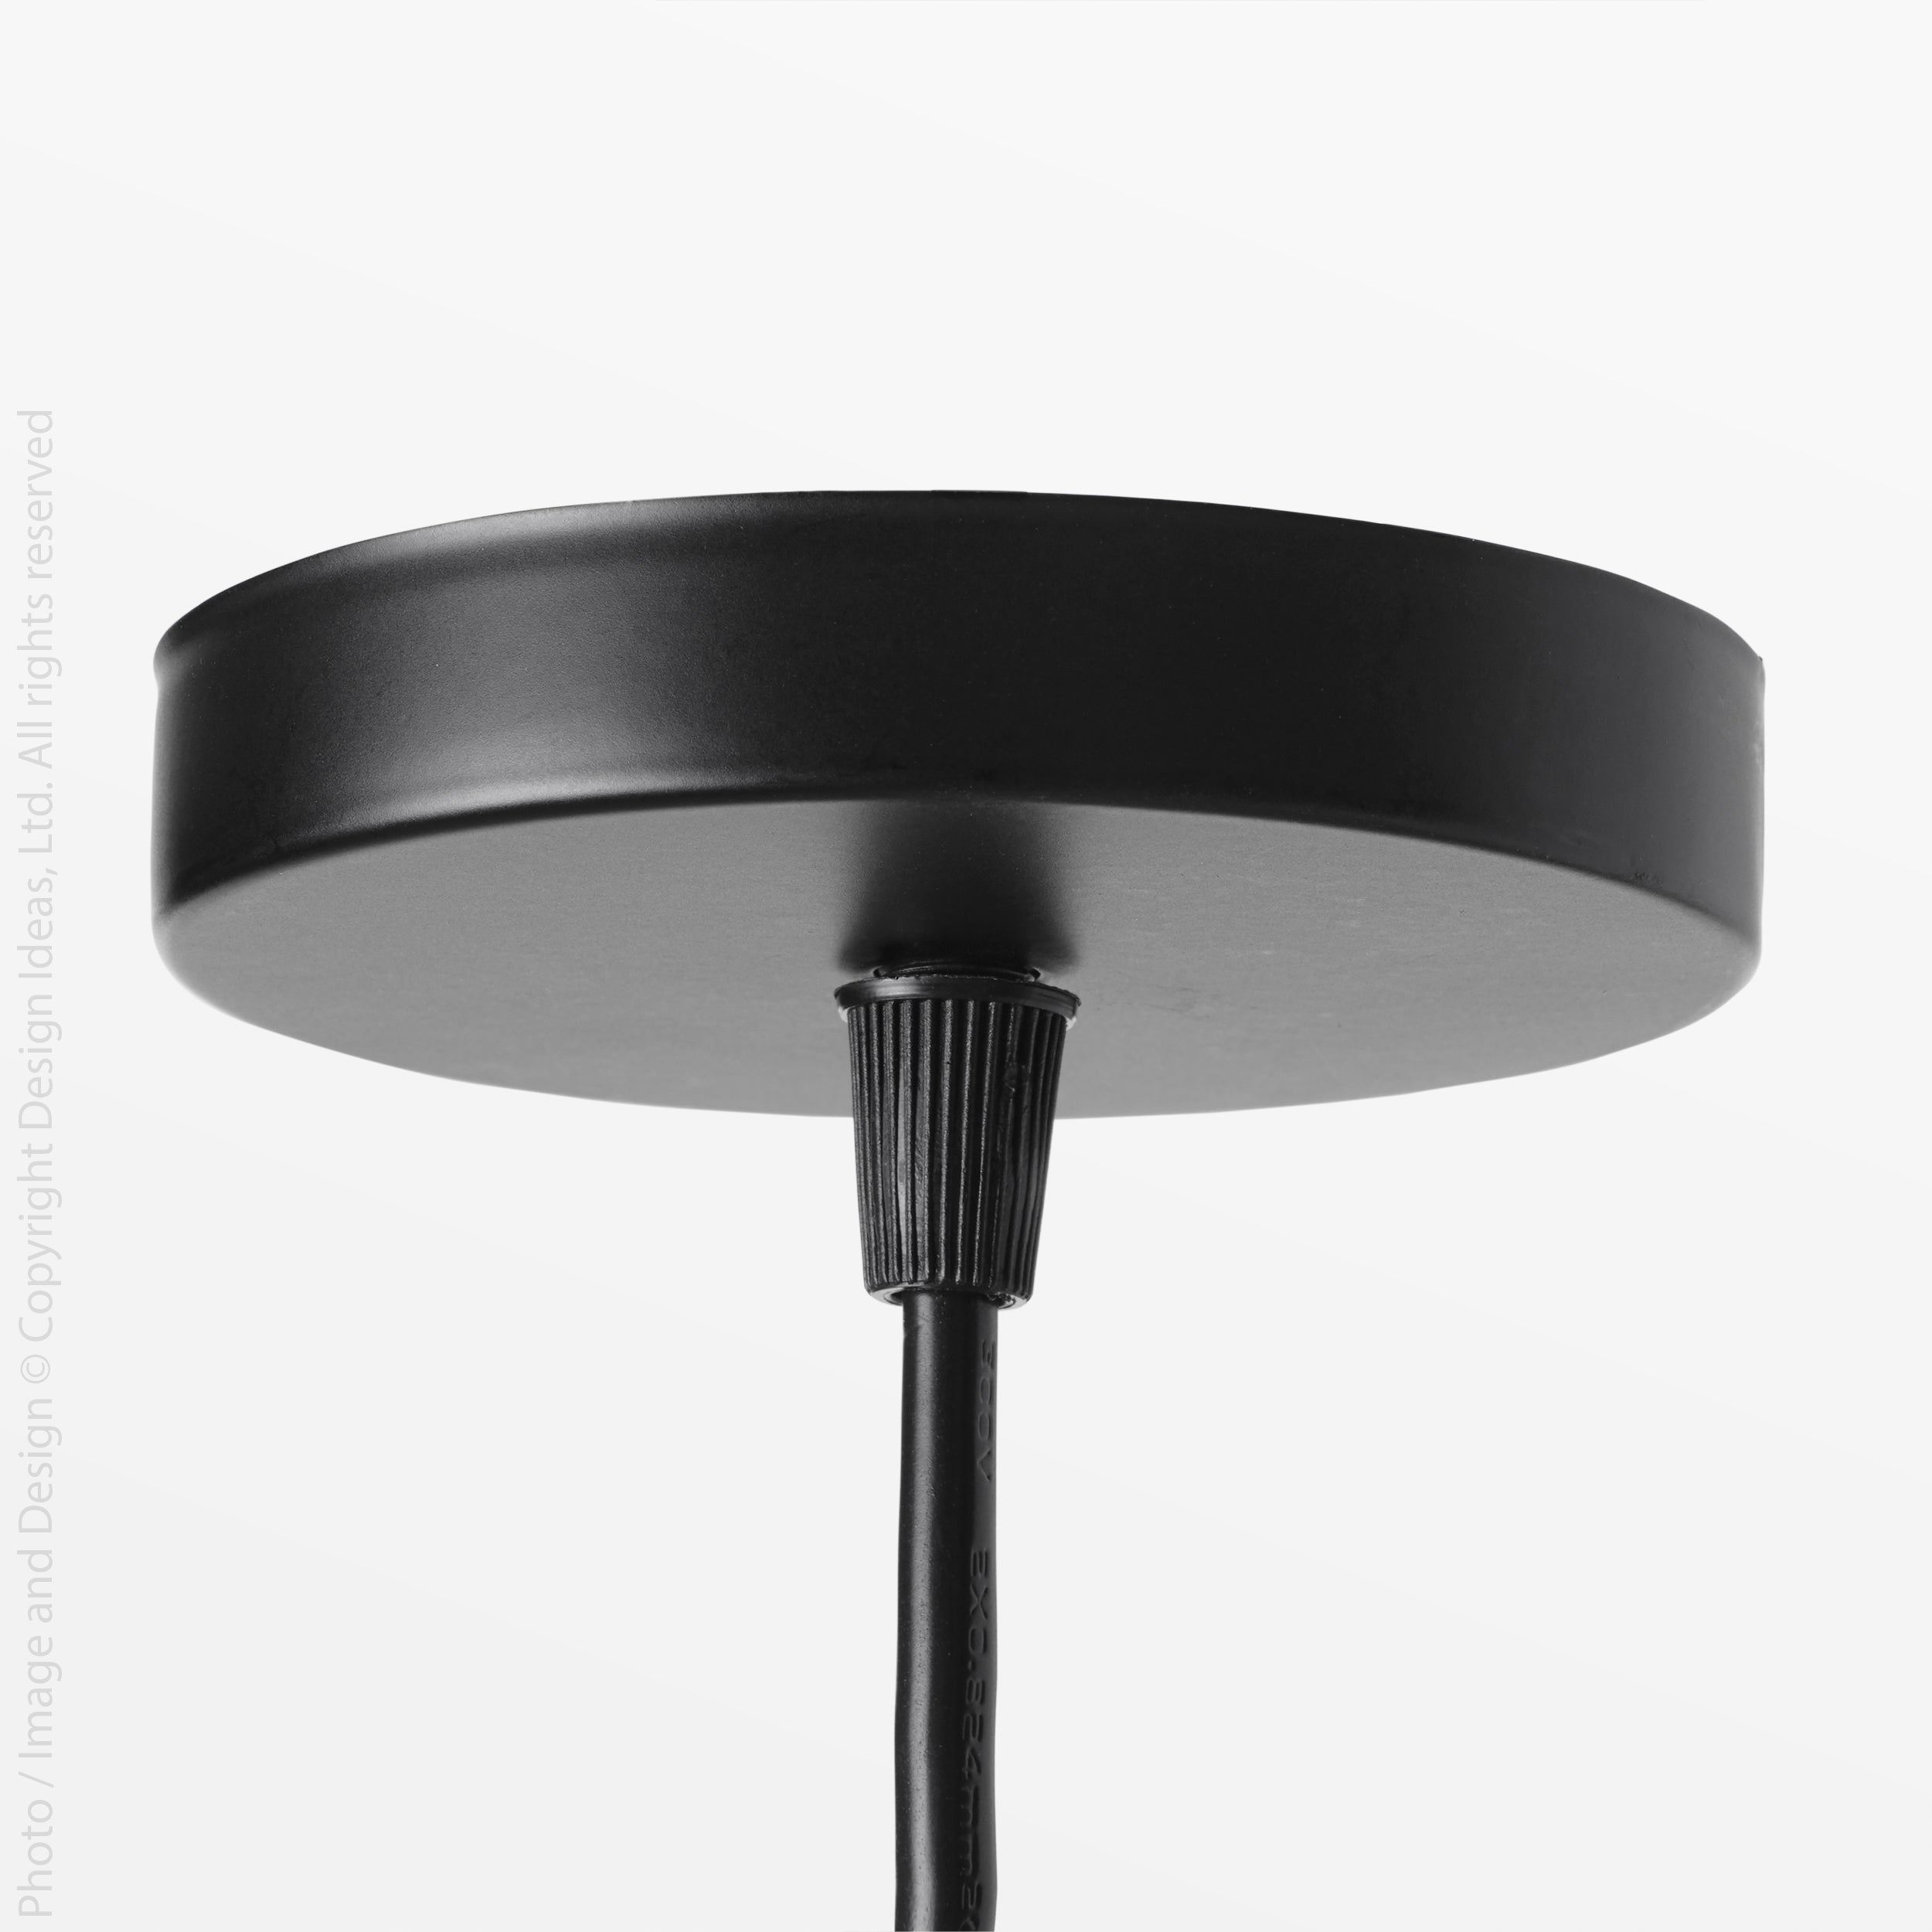 Nevis  Lampshade Black Color | Image 5 | From the Nevis Collection | Masterfully assembled with natural  for long lasting use | Available in natural color | texxture home